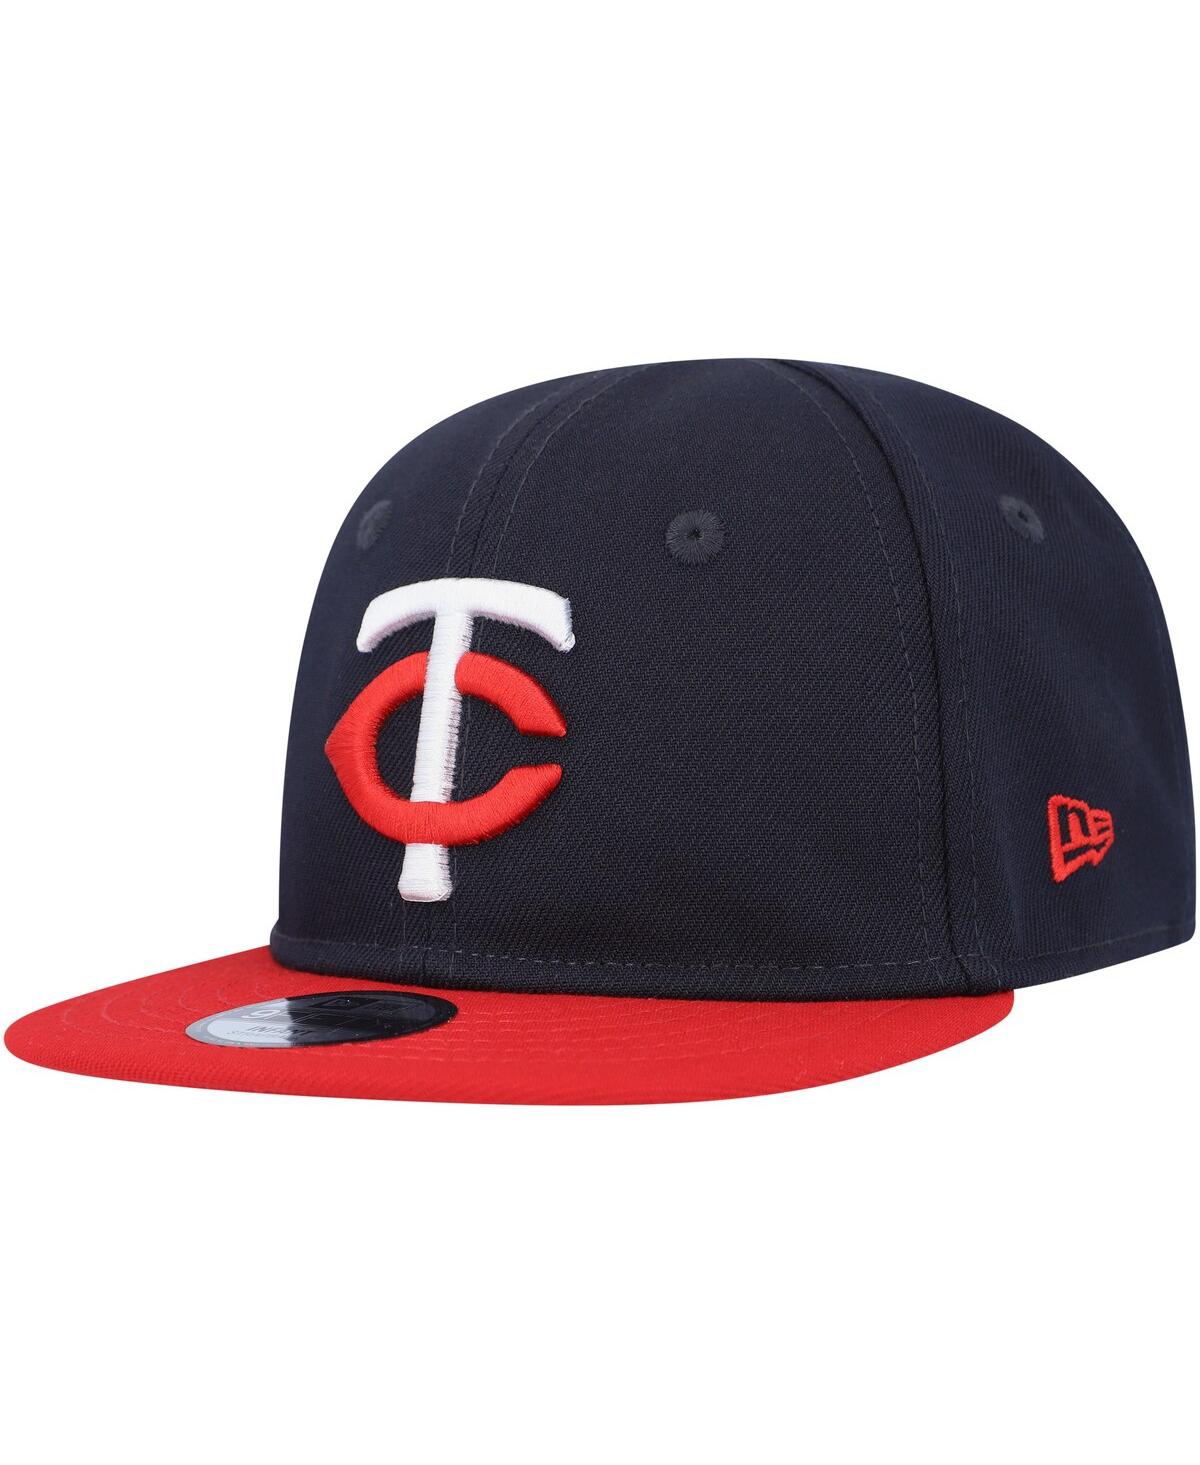 Shop New Era Infant Boys And Girls  Navy Minnesota Twins My First 9fifty Adjustable Hat